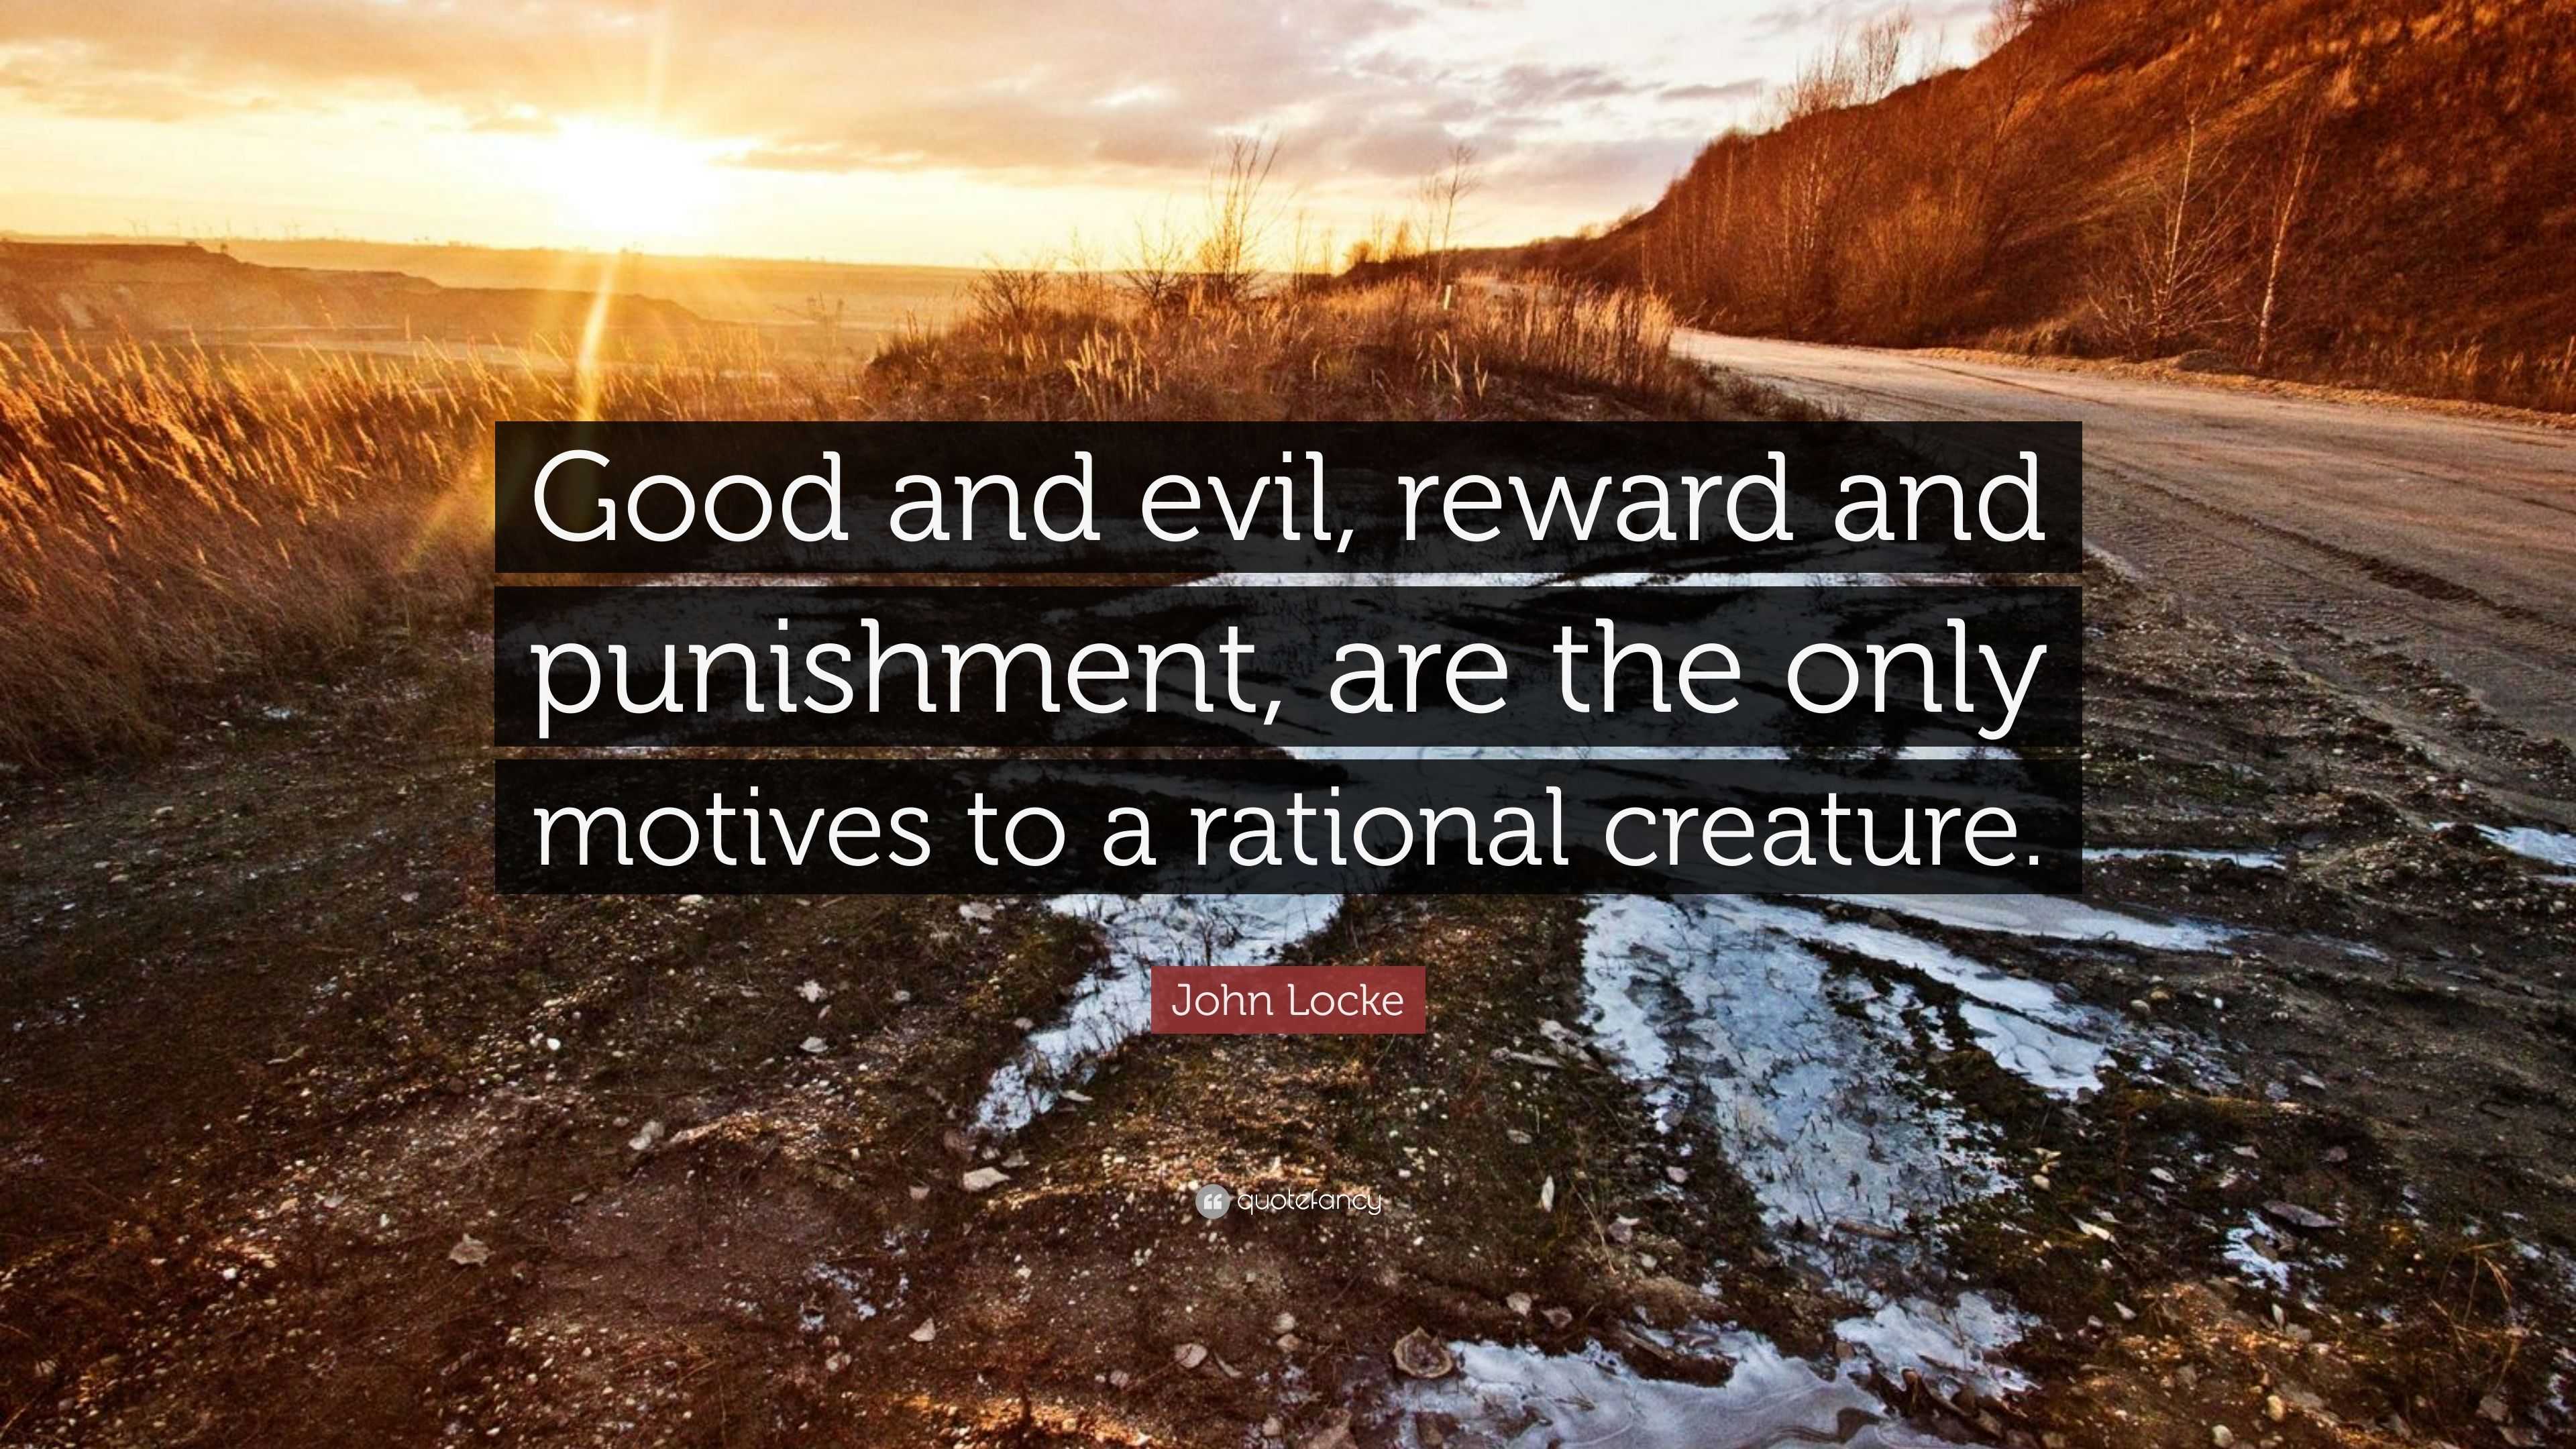 John Locke Quote: “Good and evil, reward and punishment, are the only